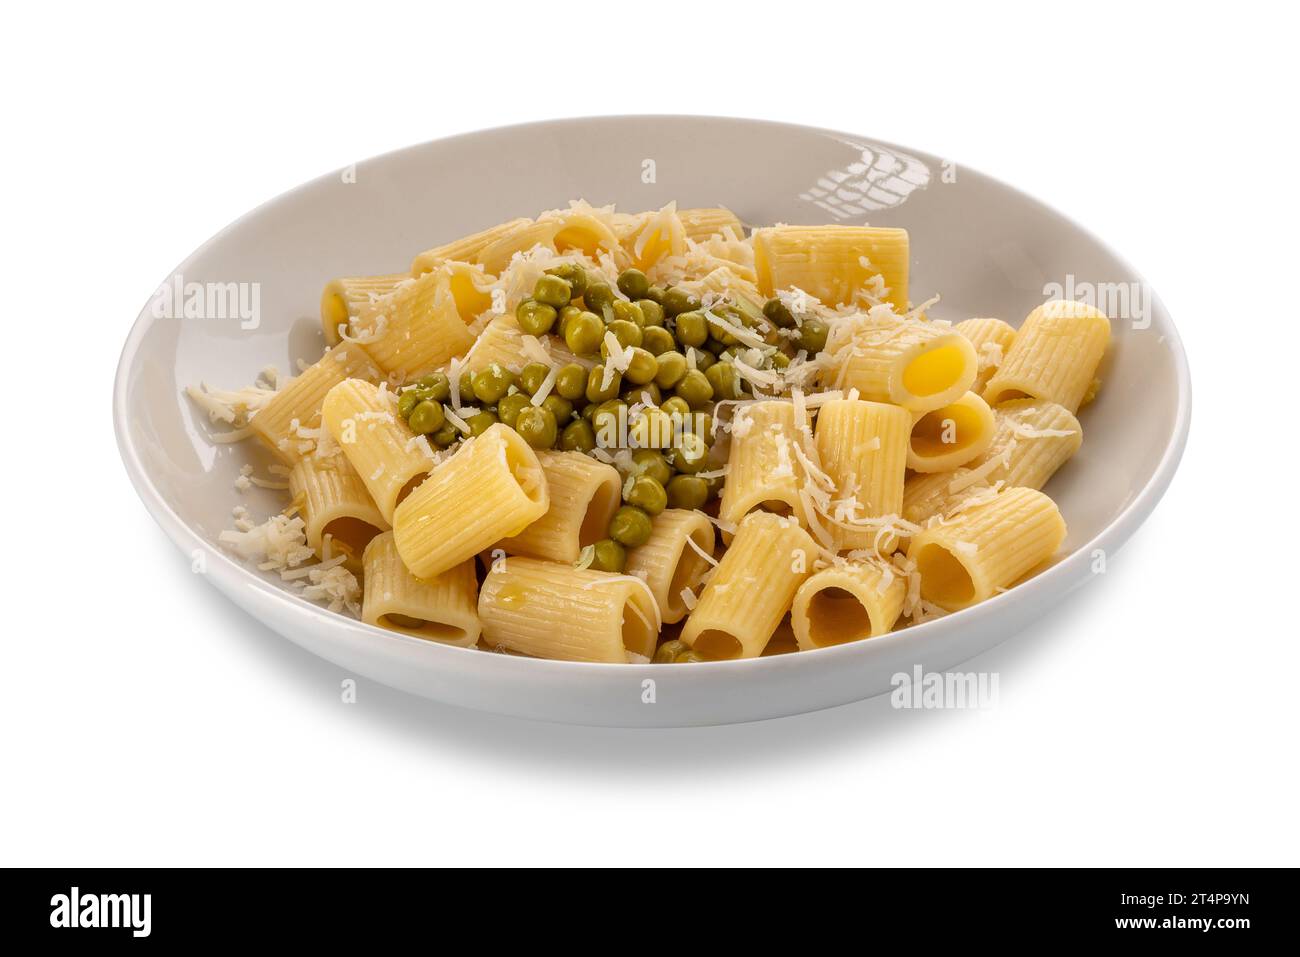 Mezze maniche macaroni with peas and olive oil sauce with grated parmesan cheese in white plate isolated on white, clipping path included Stock Photo